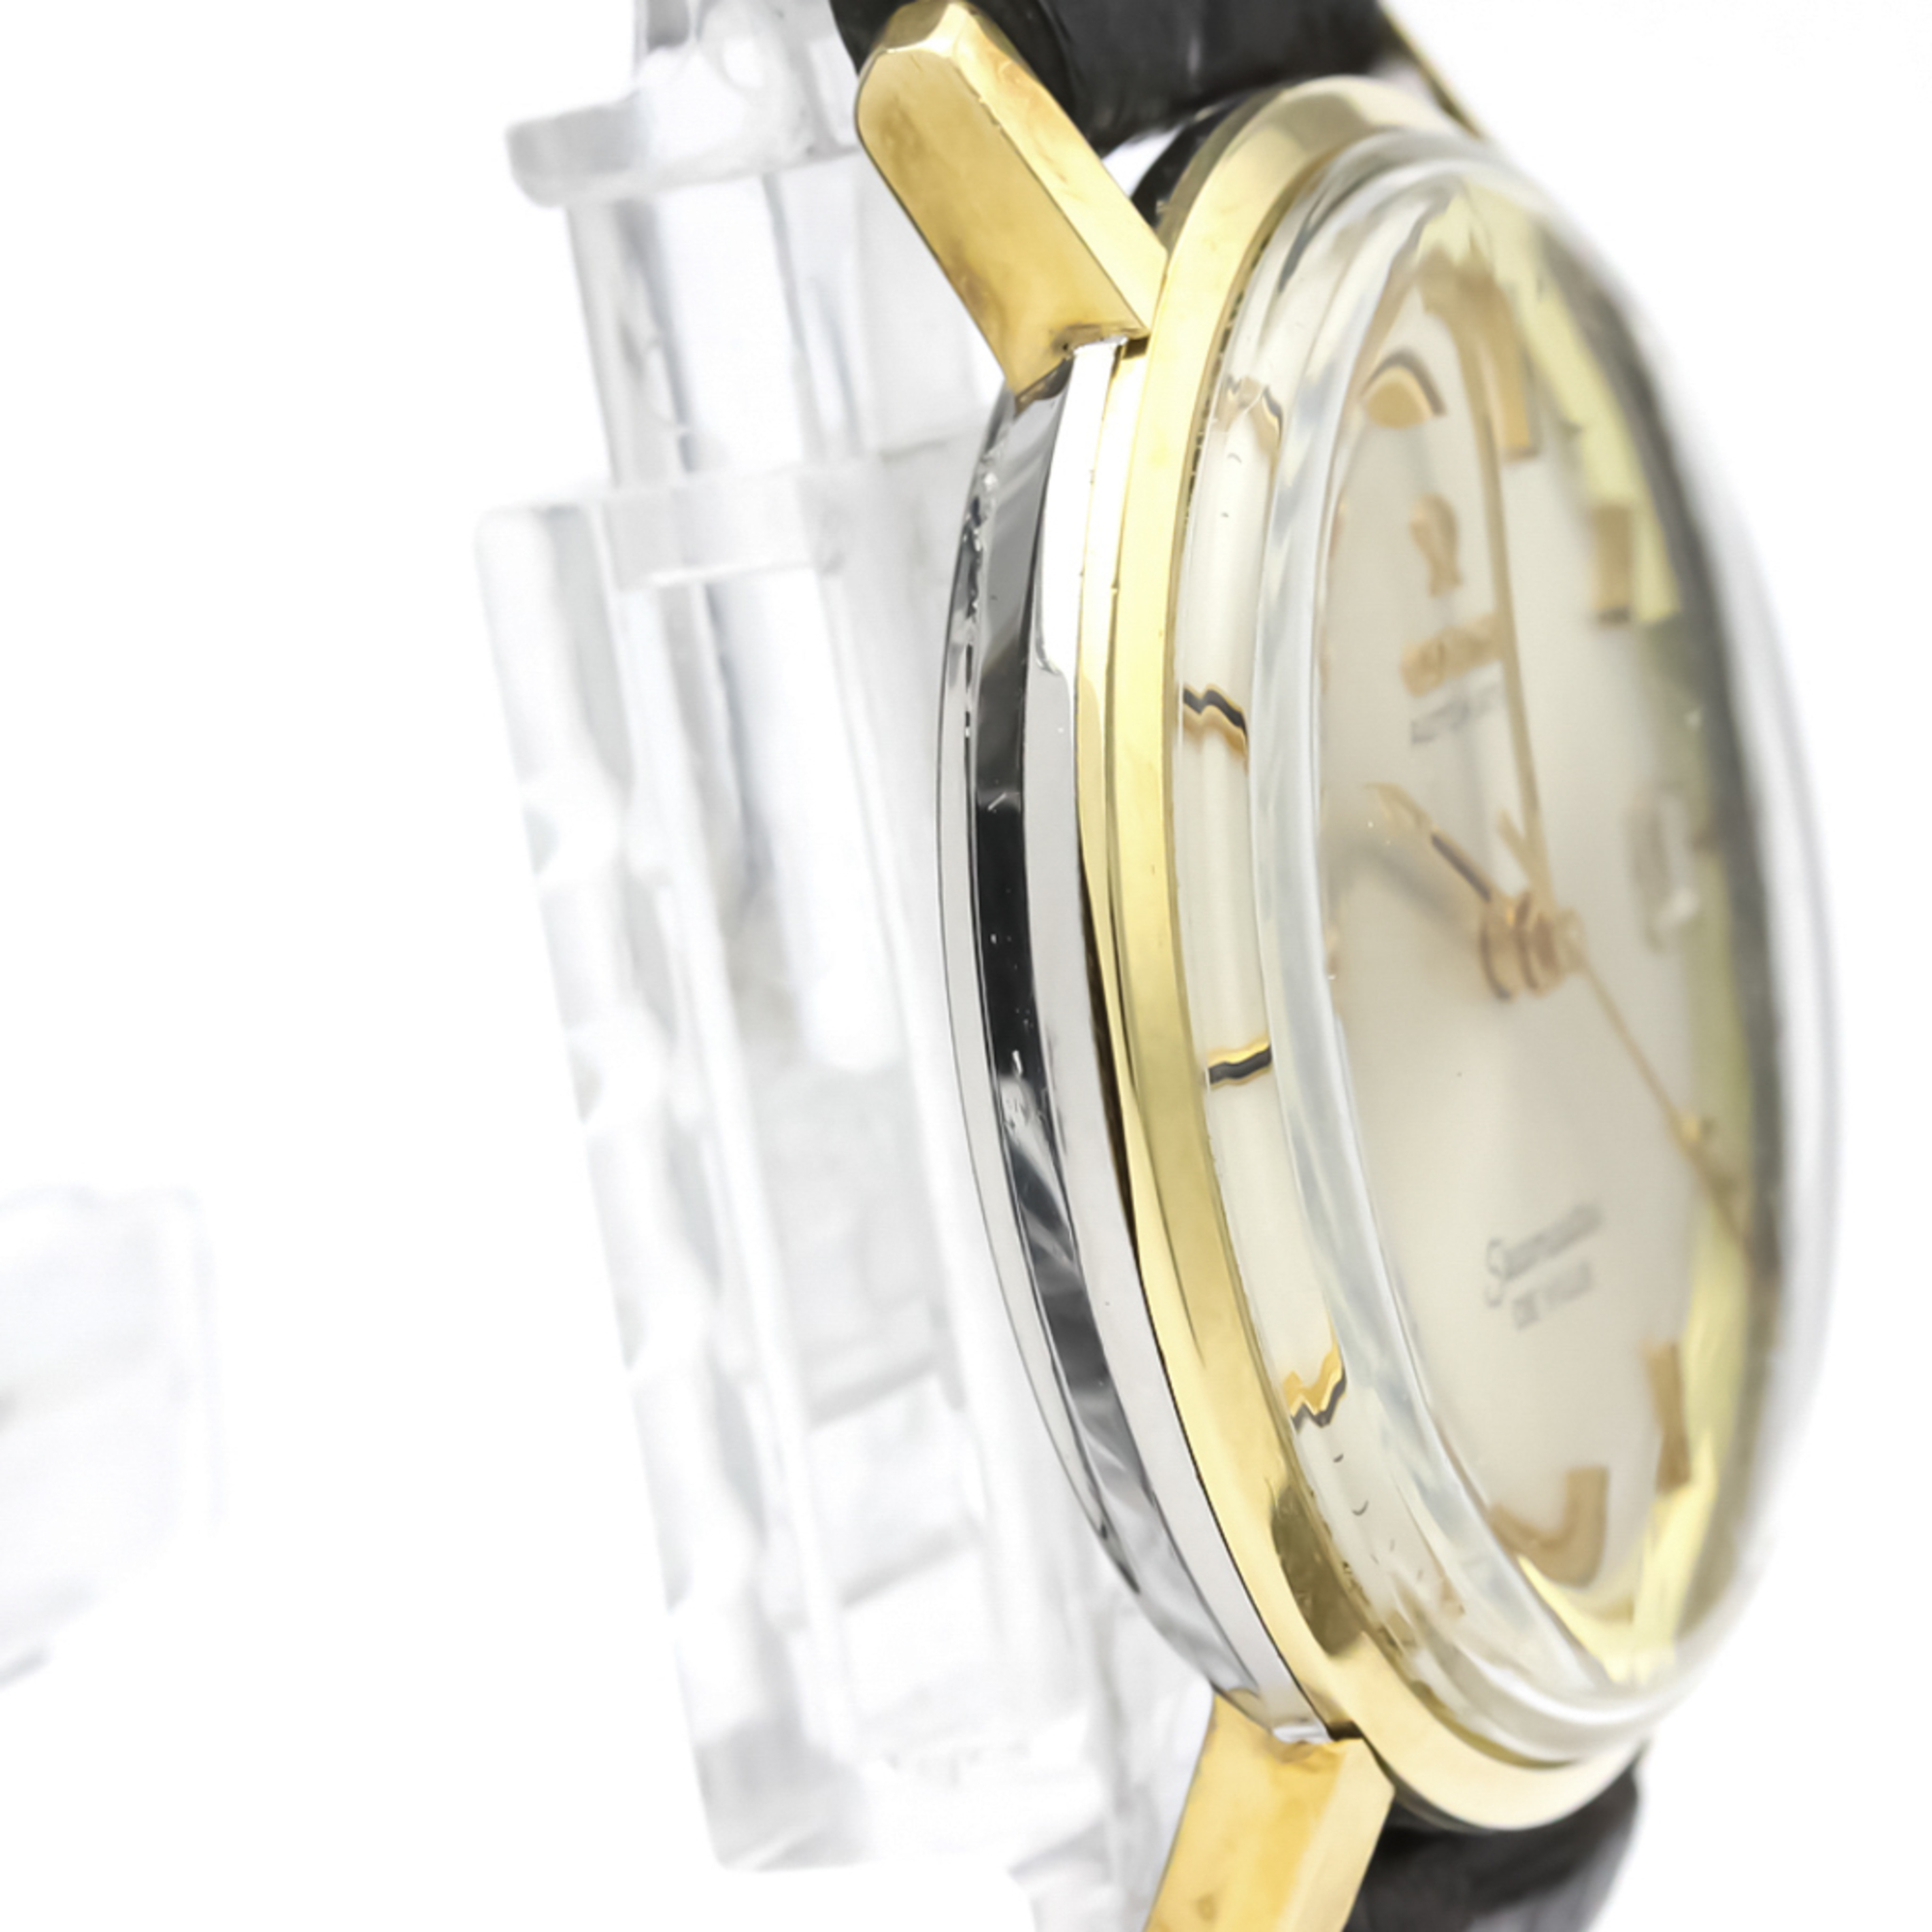 Omega Seamaster Automatic Gold Plated Men's Dress Watch